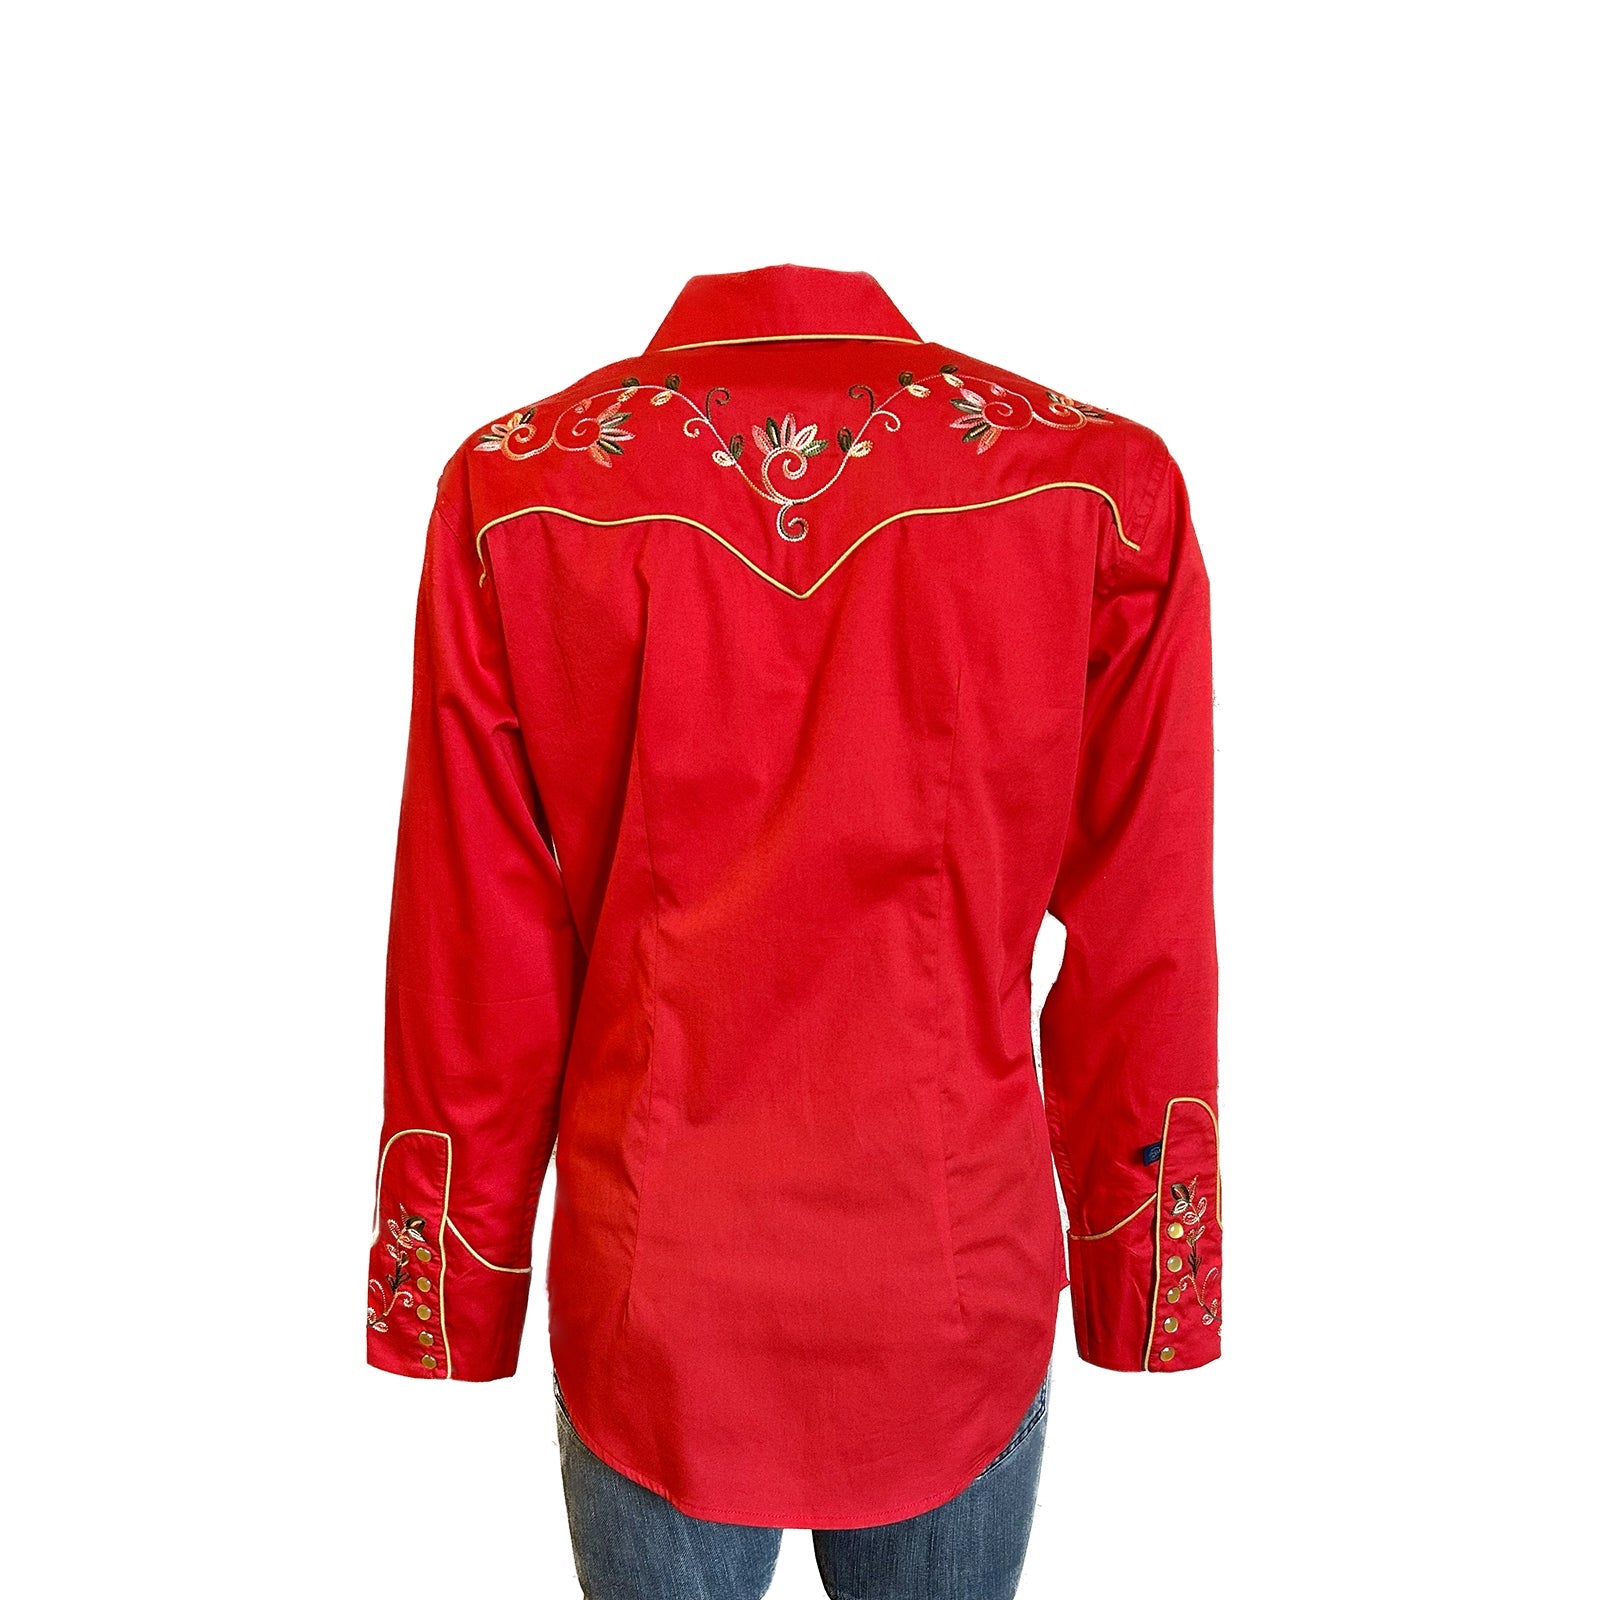 Rockmount Clothing Women's Red Vintage Variegated Floral Embroidery